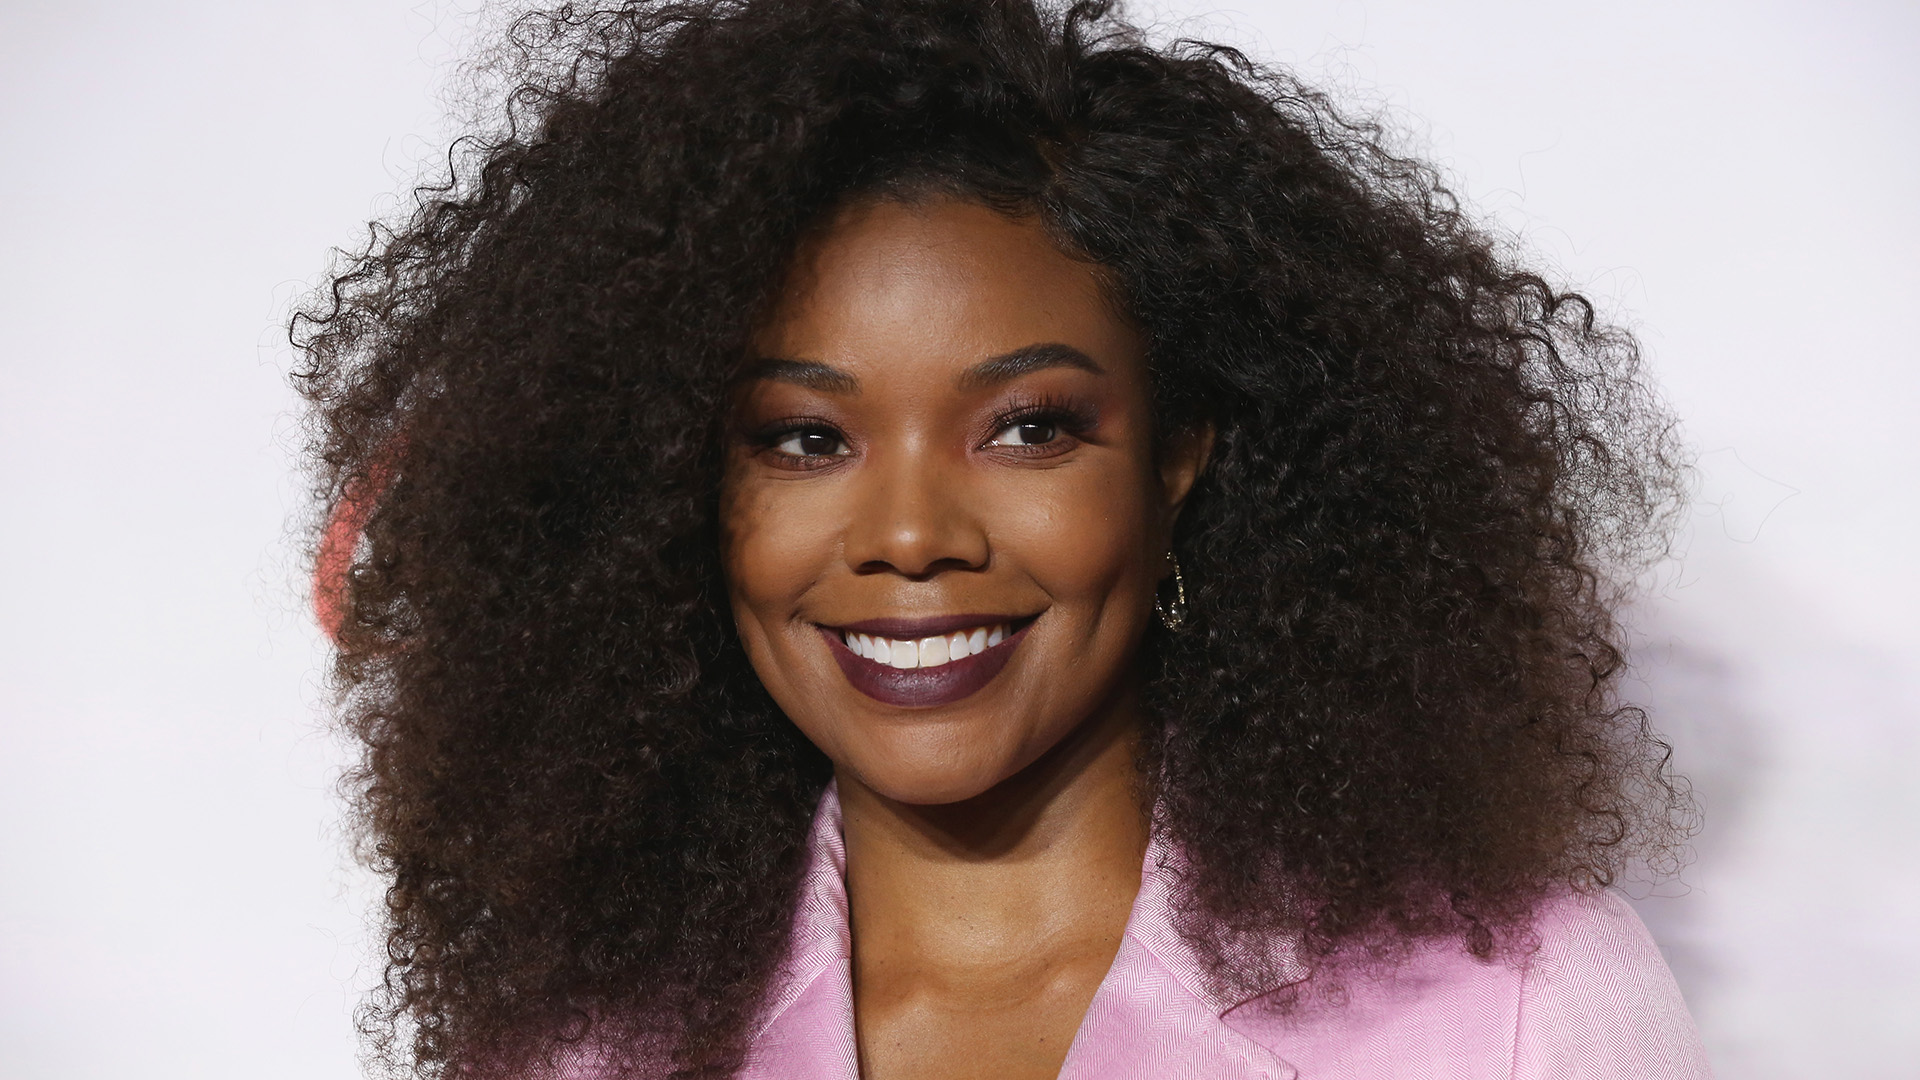 Gabrielle Union is an accomplished actress in both film and television